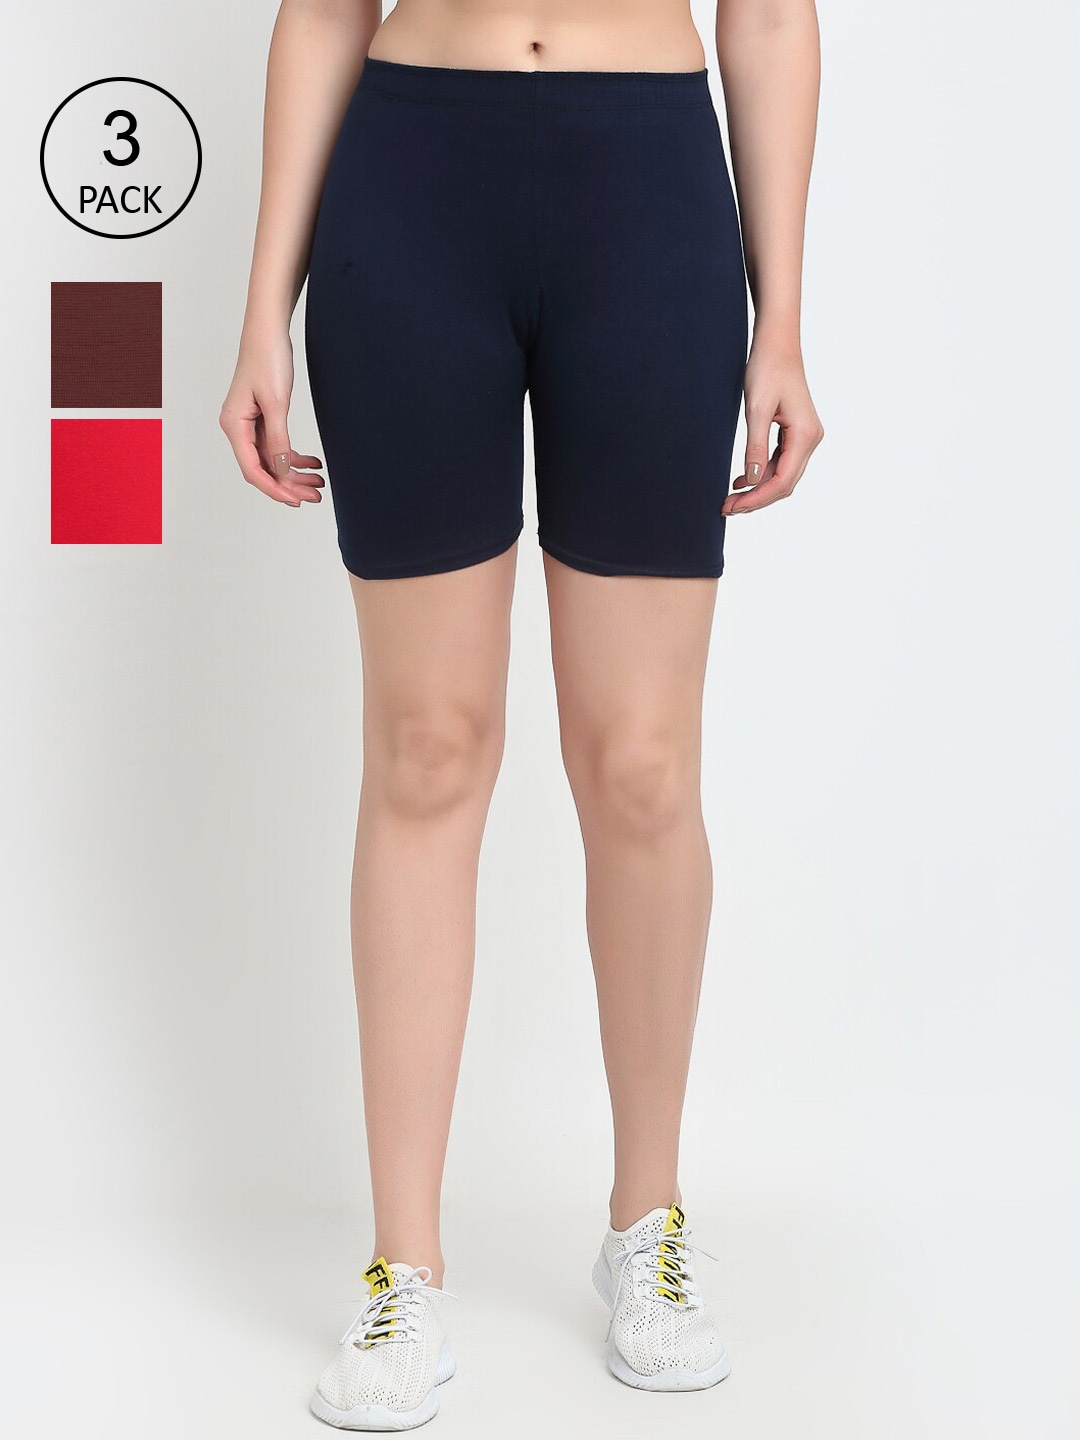 GRACIT Women Red Cycling Sports Shorts Price in India